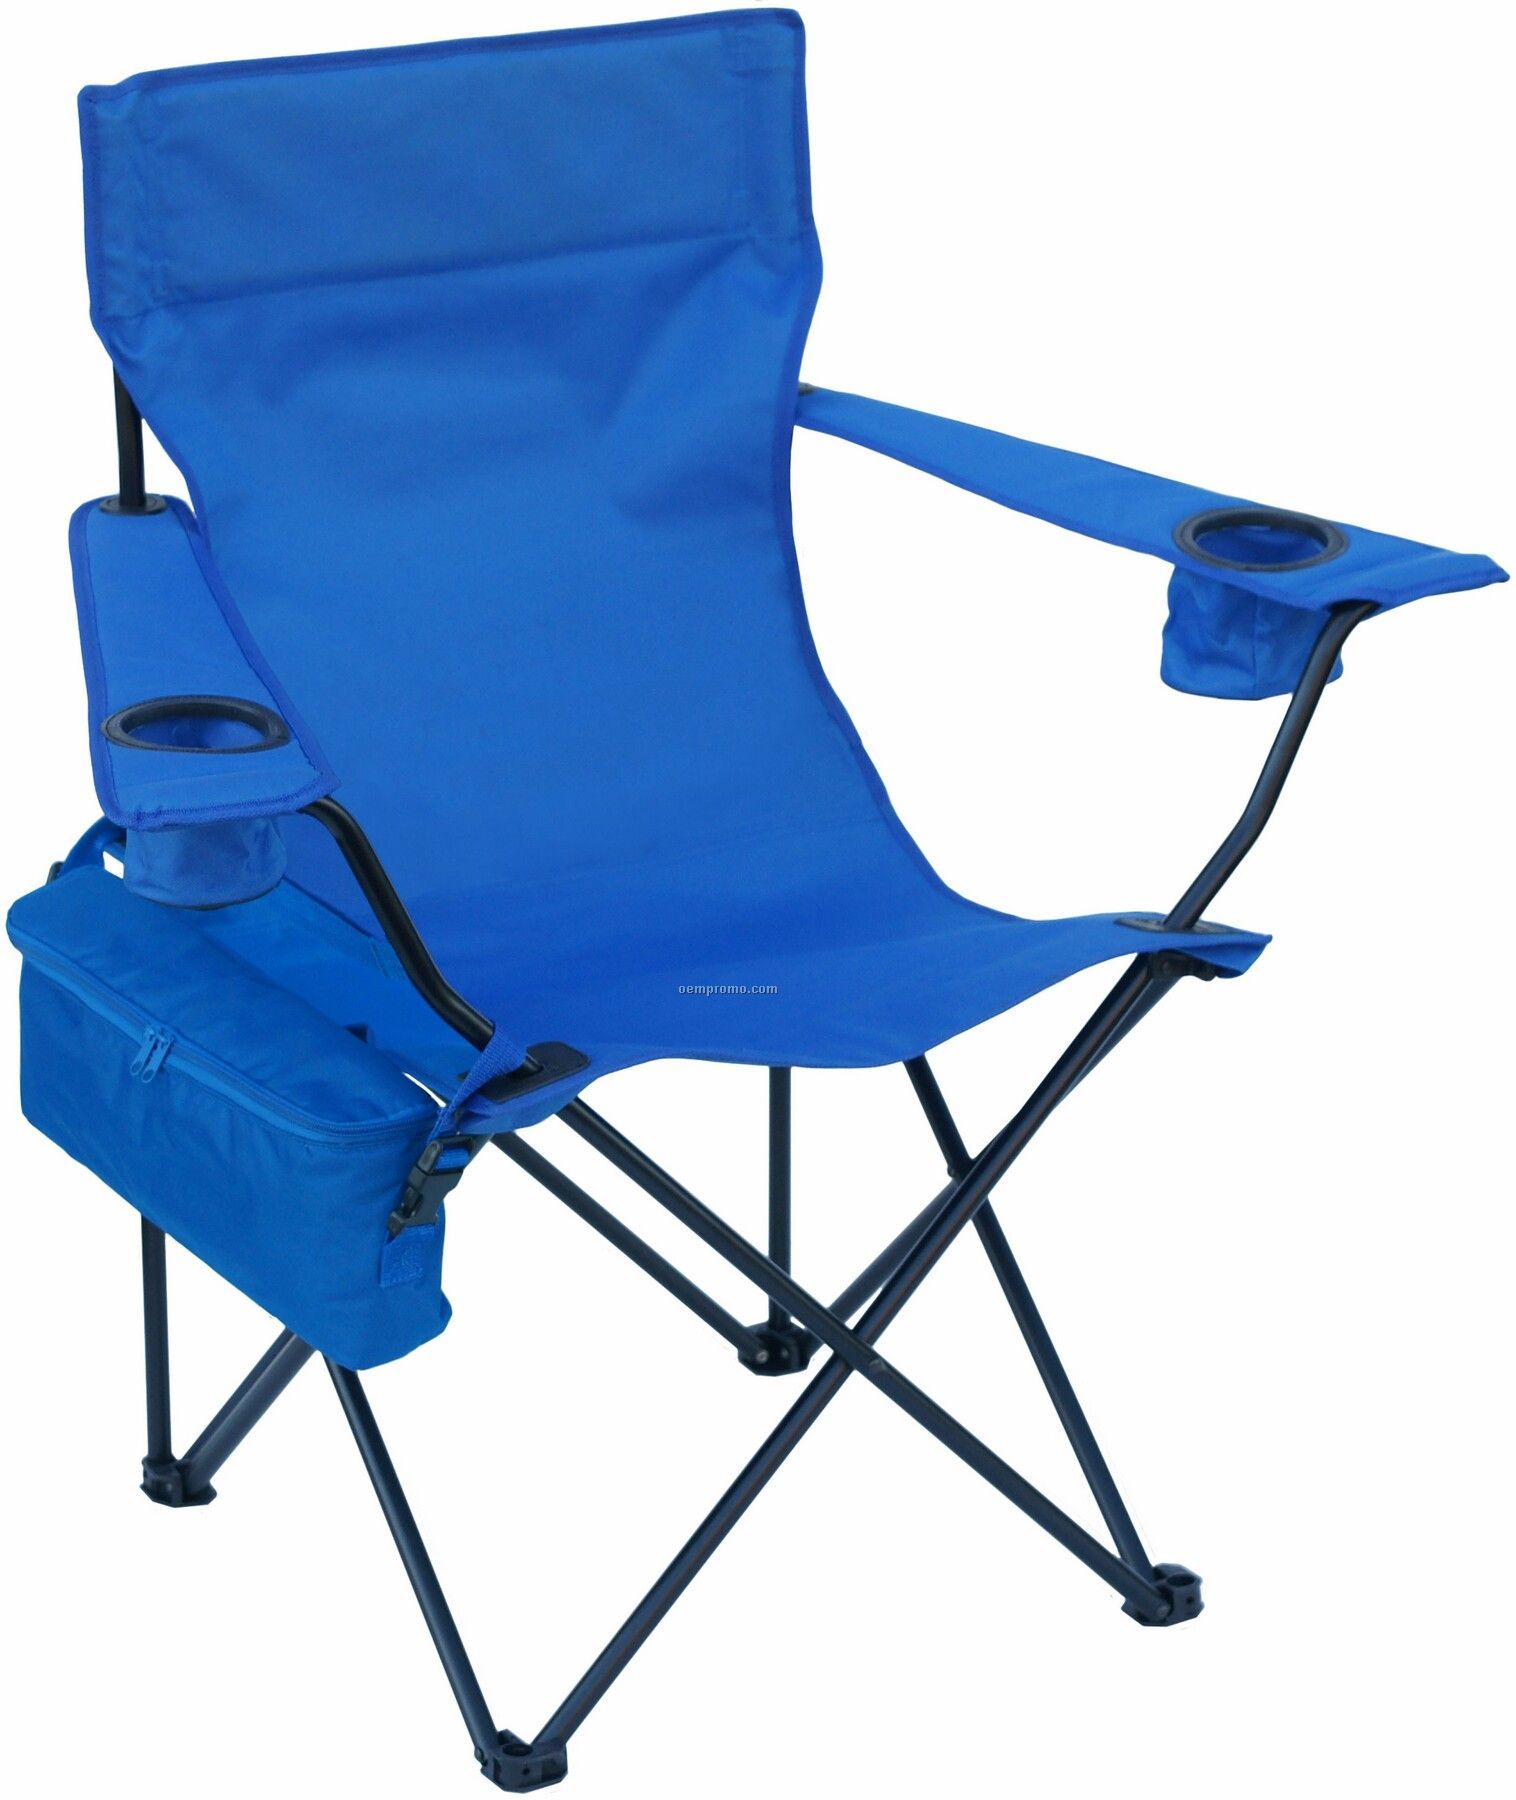 Folding Chair W/6 Pack Cooler, Arm Rests, 2 Cup Holders And Carry Bag